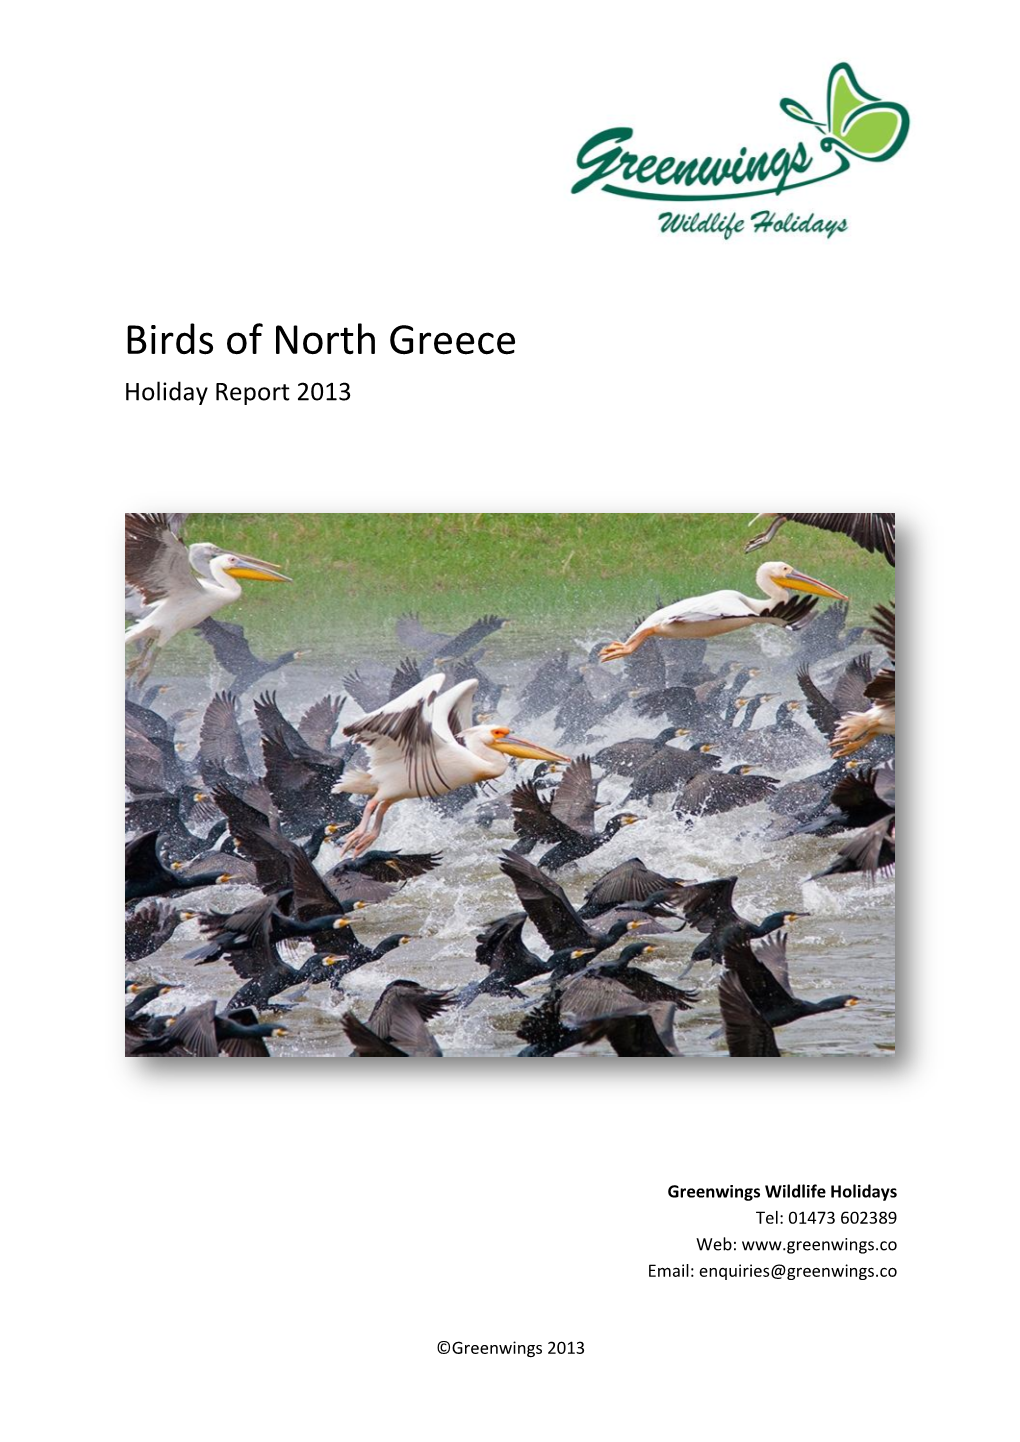 Birds of North Greece Holiday Report 2013